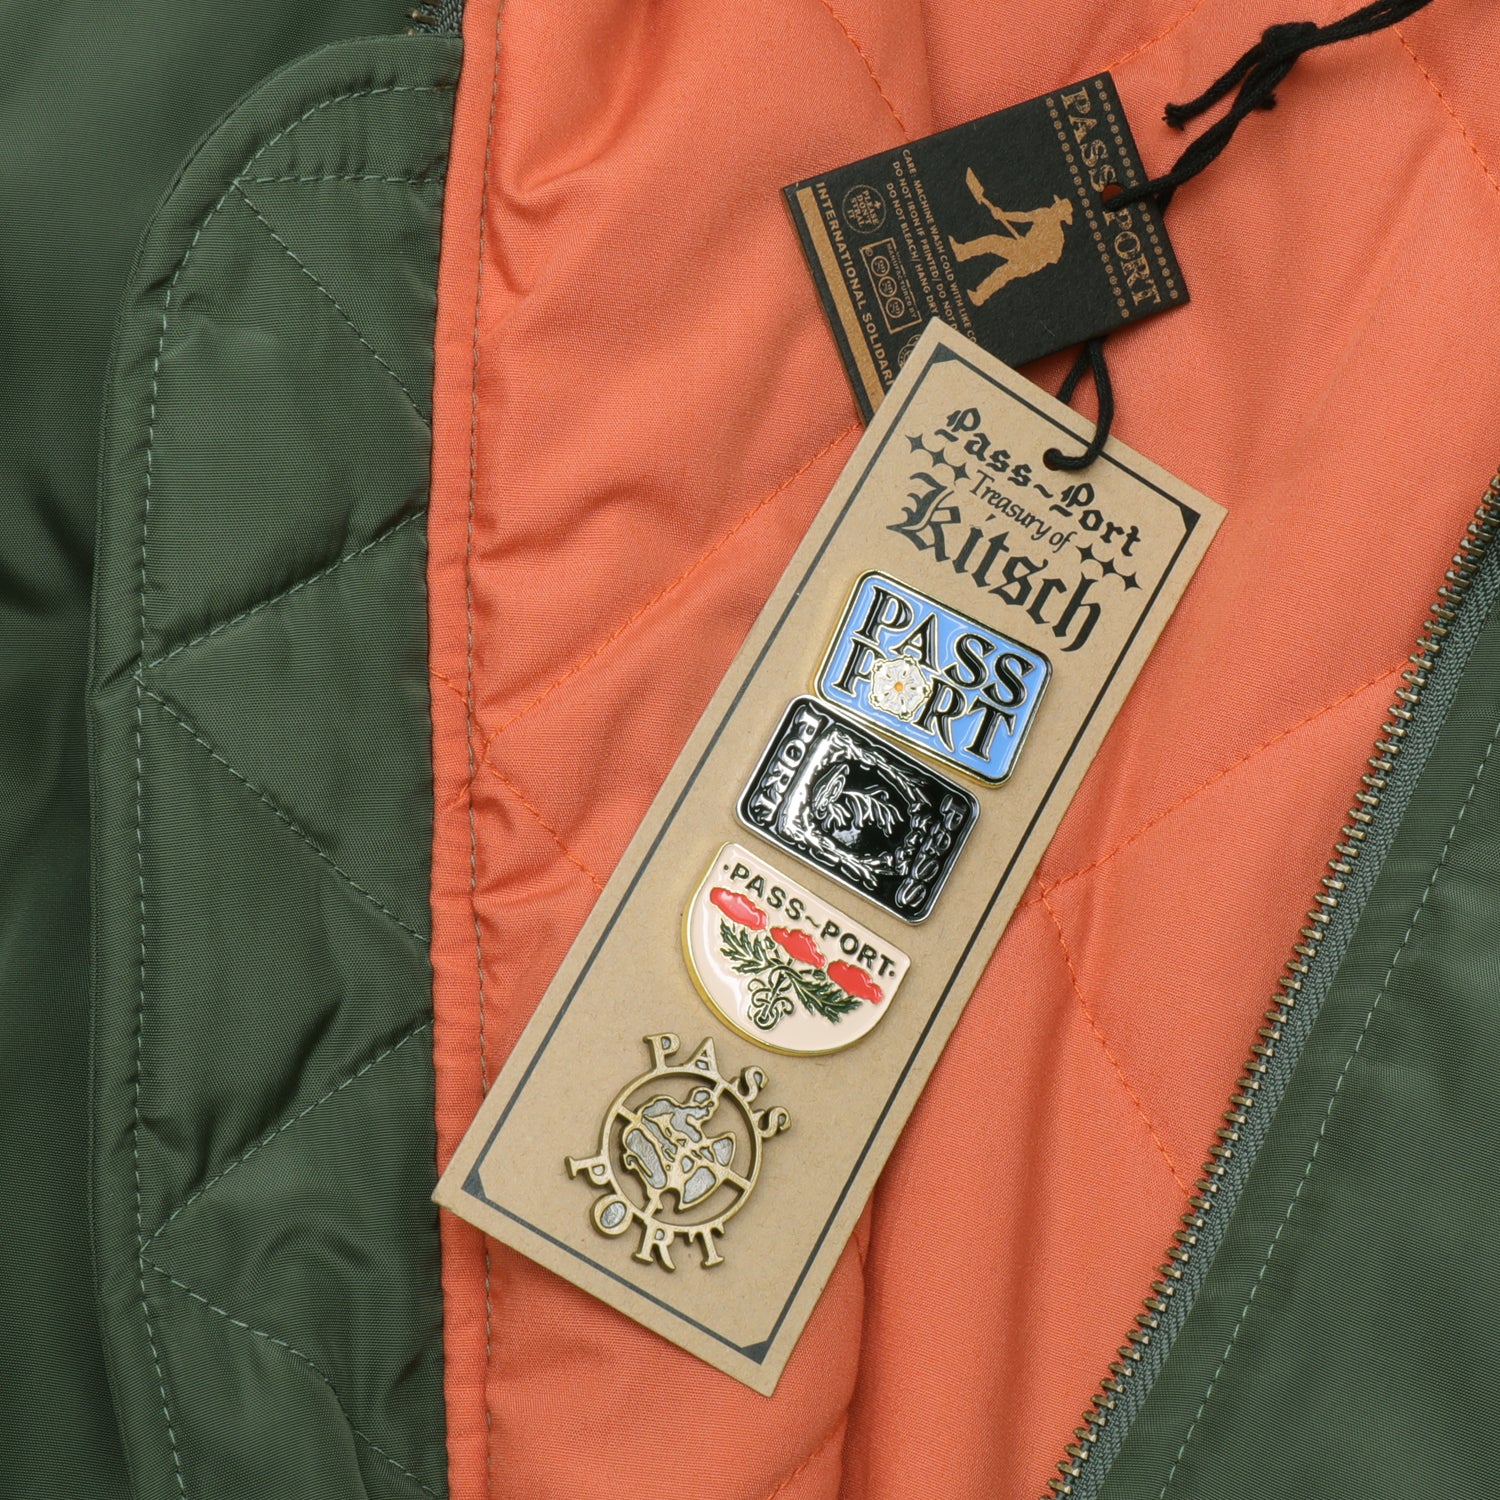 Crystal Embroidery Freight Jacket (Olive)